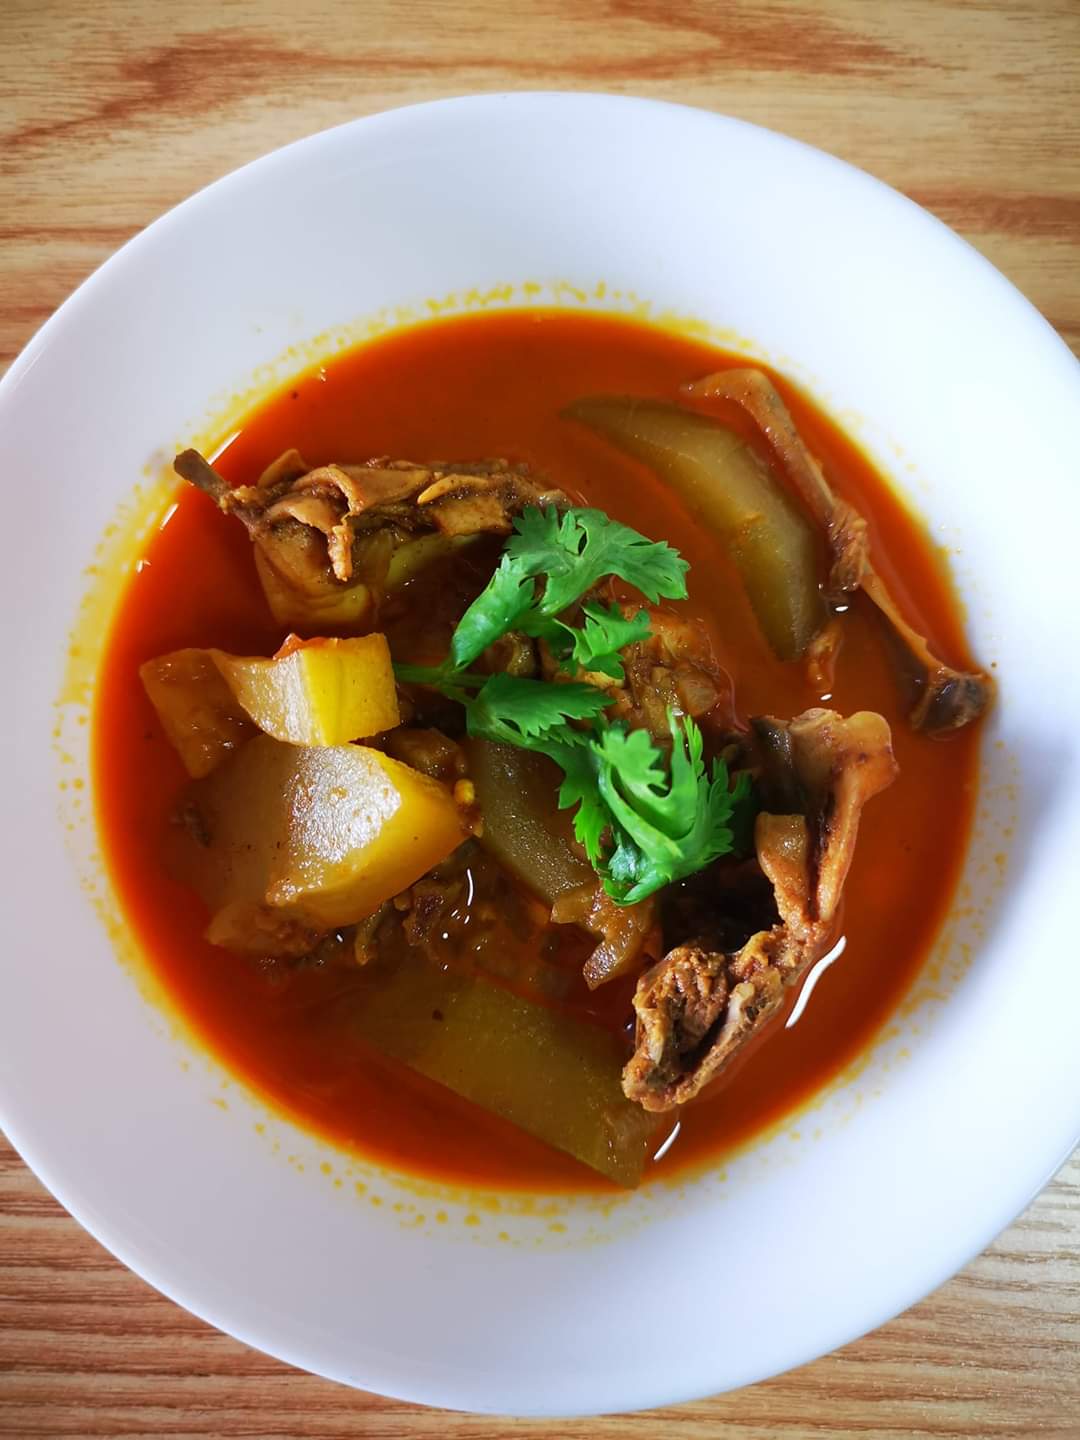 /sites/hexassets/Assets/recipes/my-best-healthy-recipe/myanmar-curry-p-thant.jpg